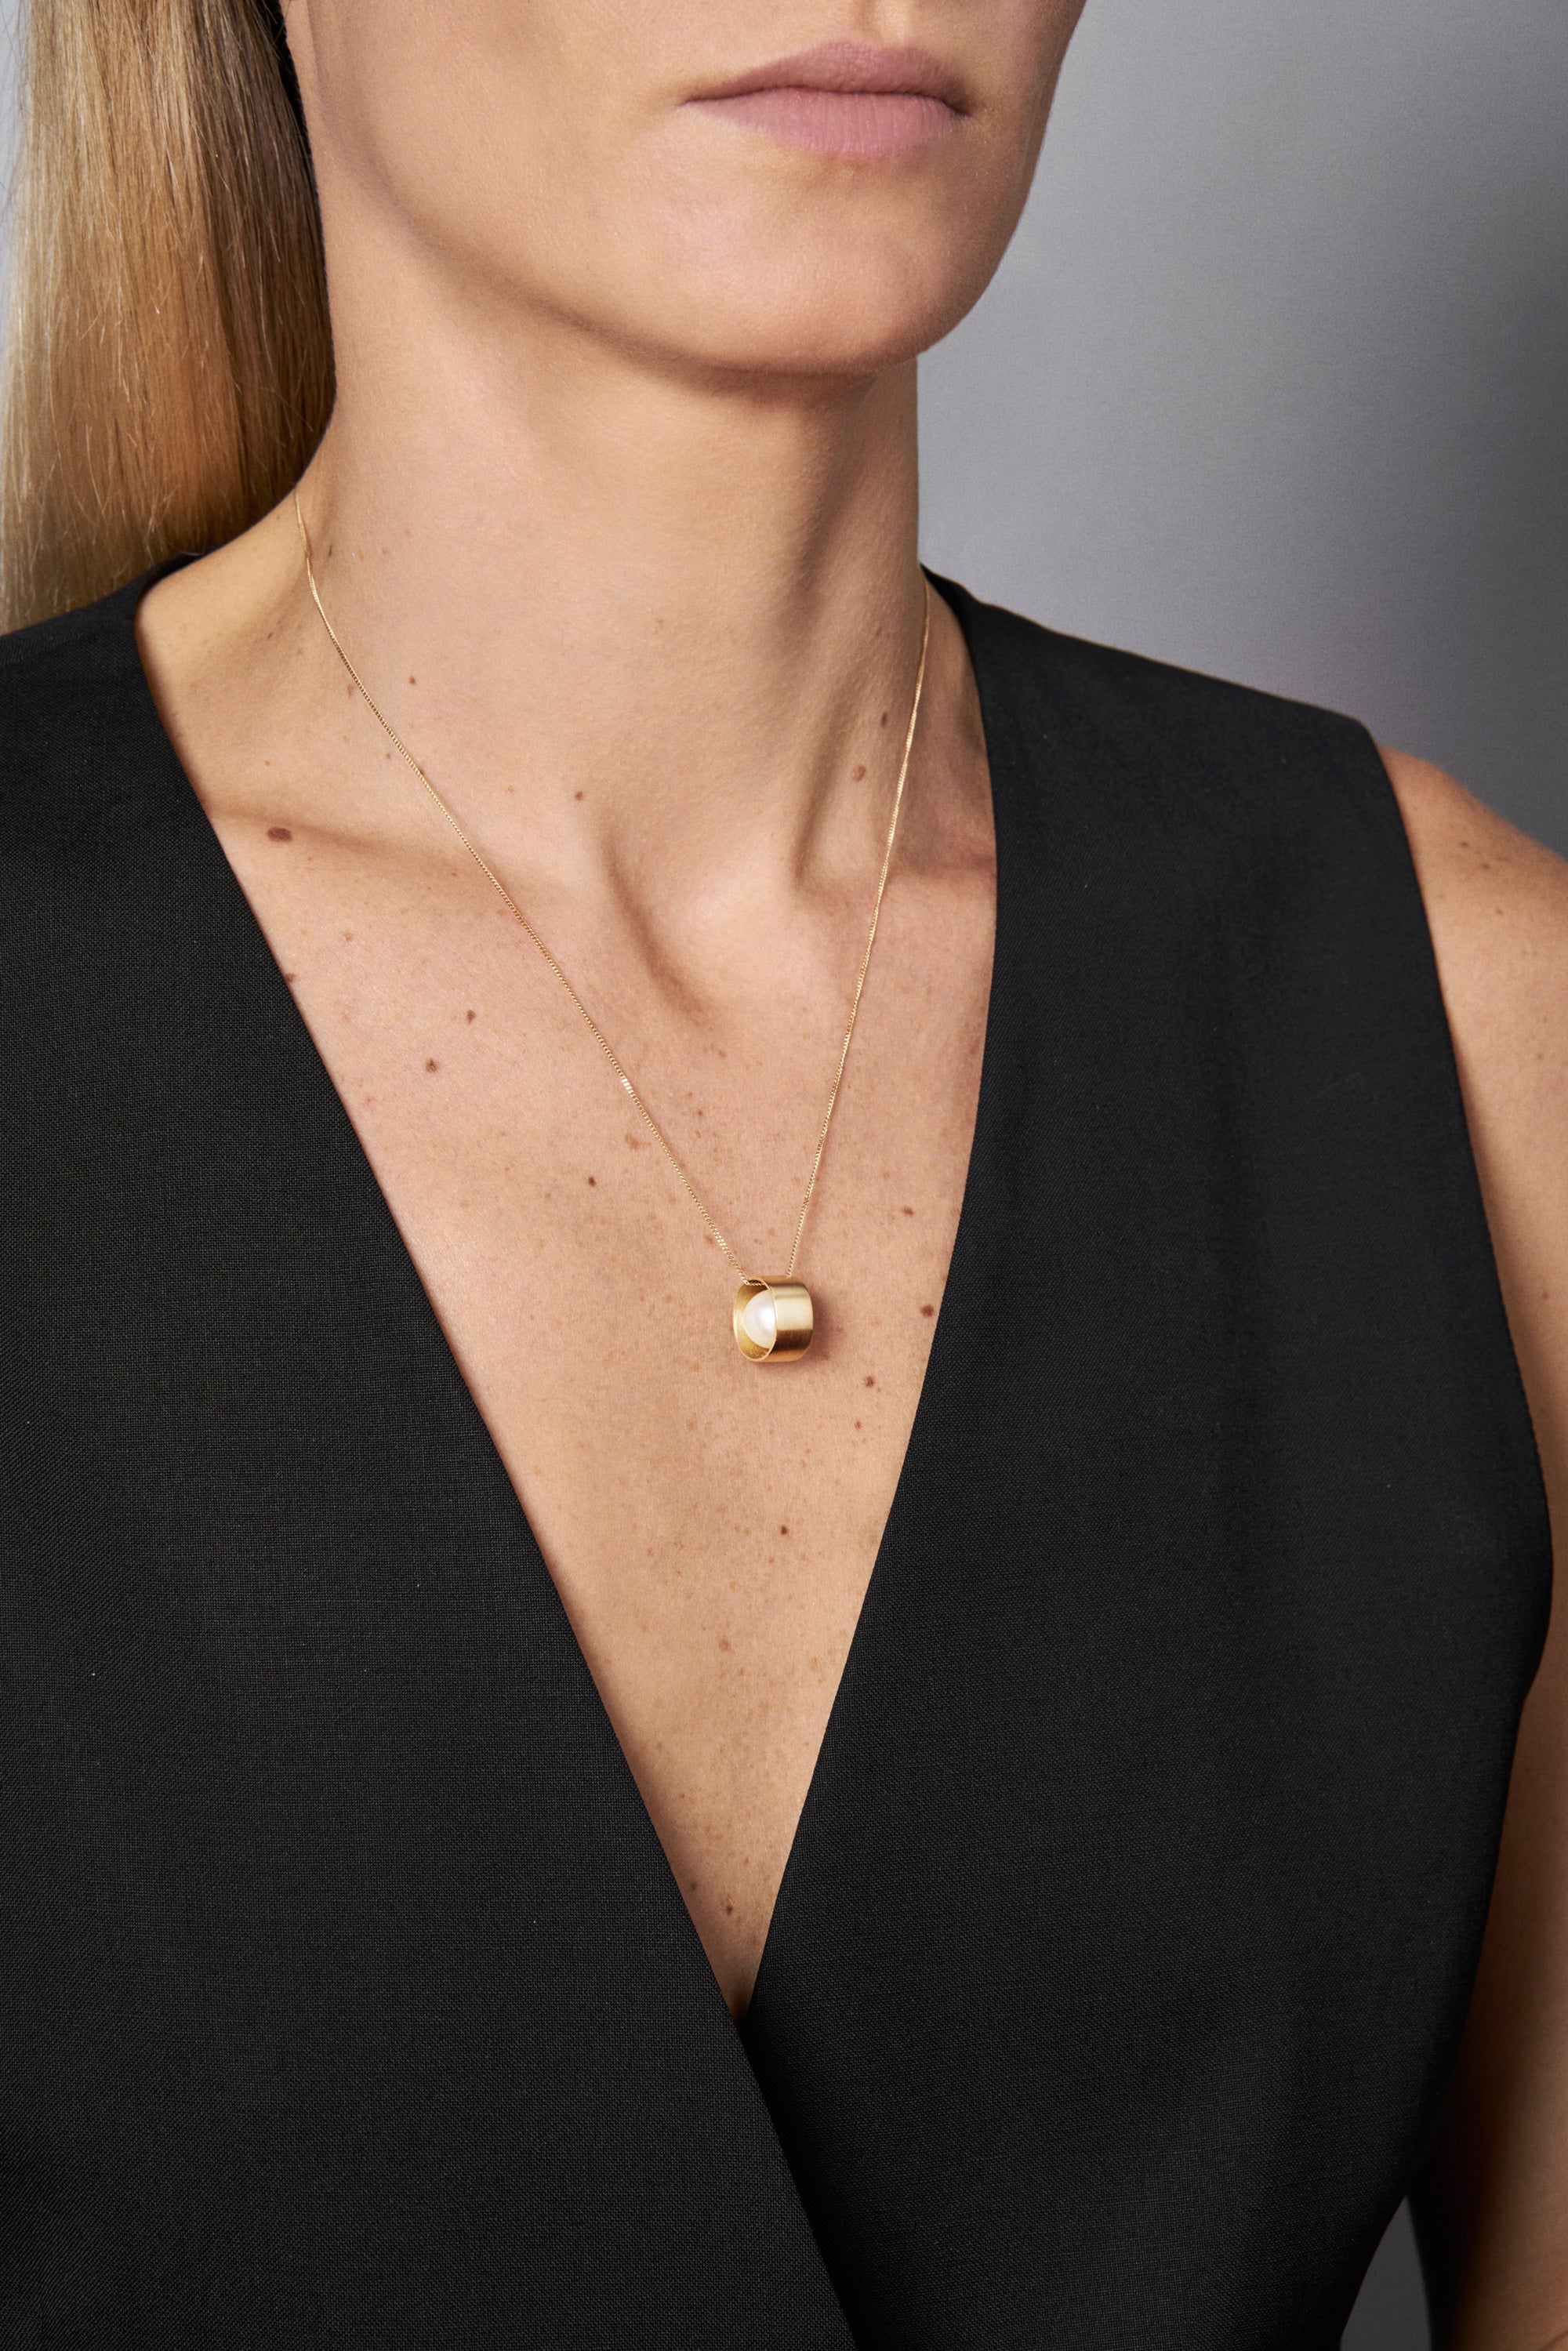 18KT yellow gold band necklace with akoya pearl worn by female neck - Moon N